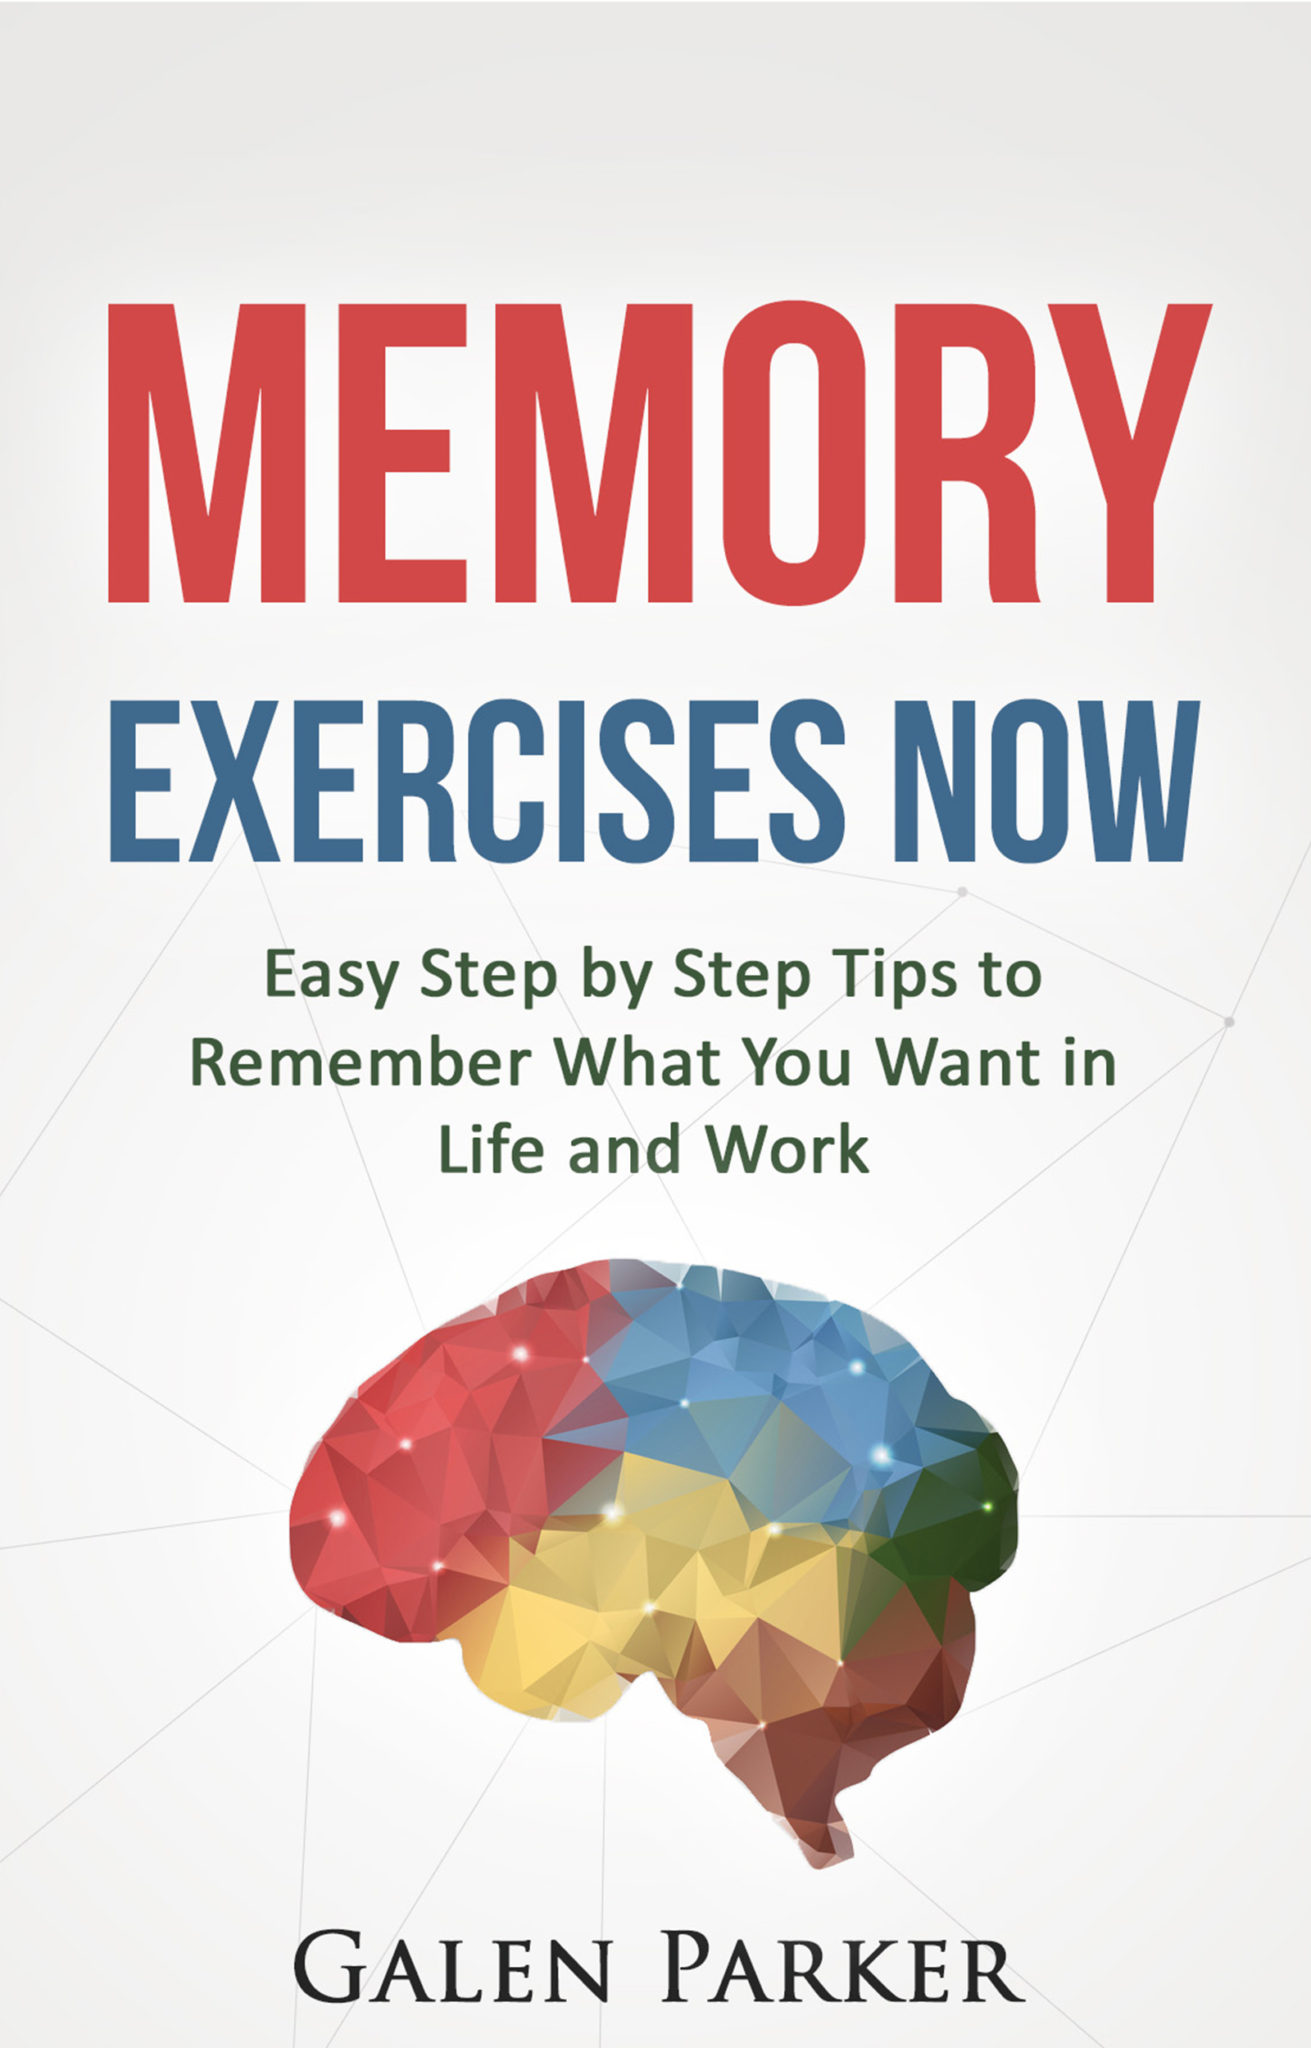 FREE: Memory Exercises Now: Easy Step by Step Tips to Remember What You Want in Life and Work by Galen Parker